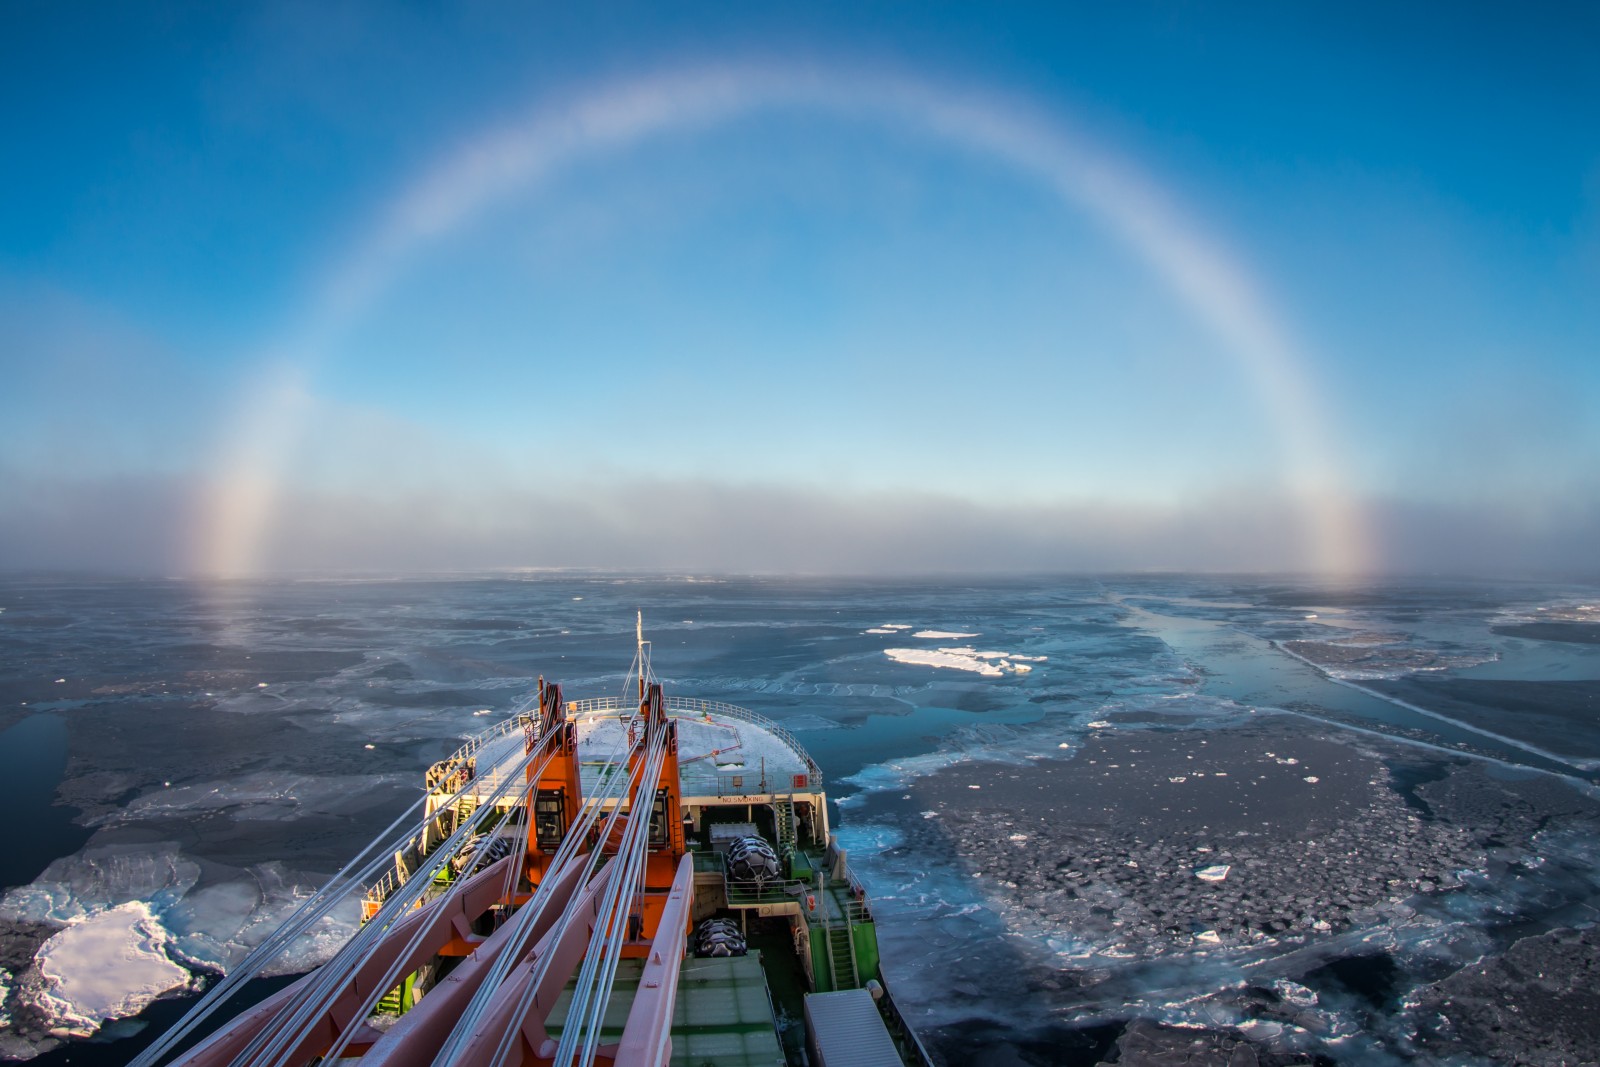 “Above the foggy strip, this white arch was shining, covering one third of the visible sky in the direction of the ship's bow,” he explains. “It was a so-called white, or fog rainbow, which appears on the fog droplets, which are much smaller then rain droplets and cause different optic effects, which is a reason of its white colour.”